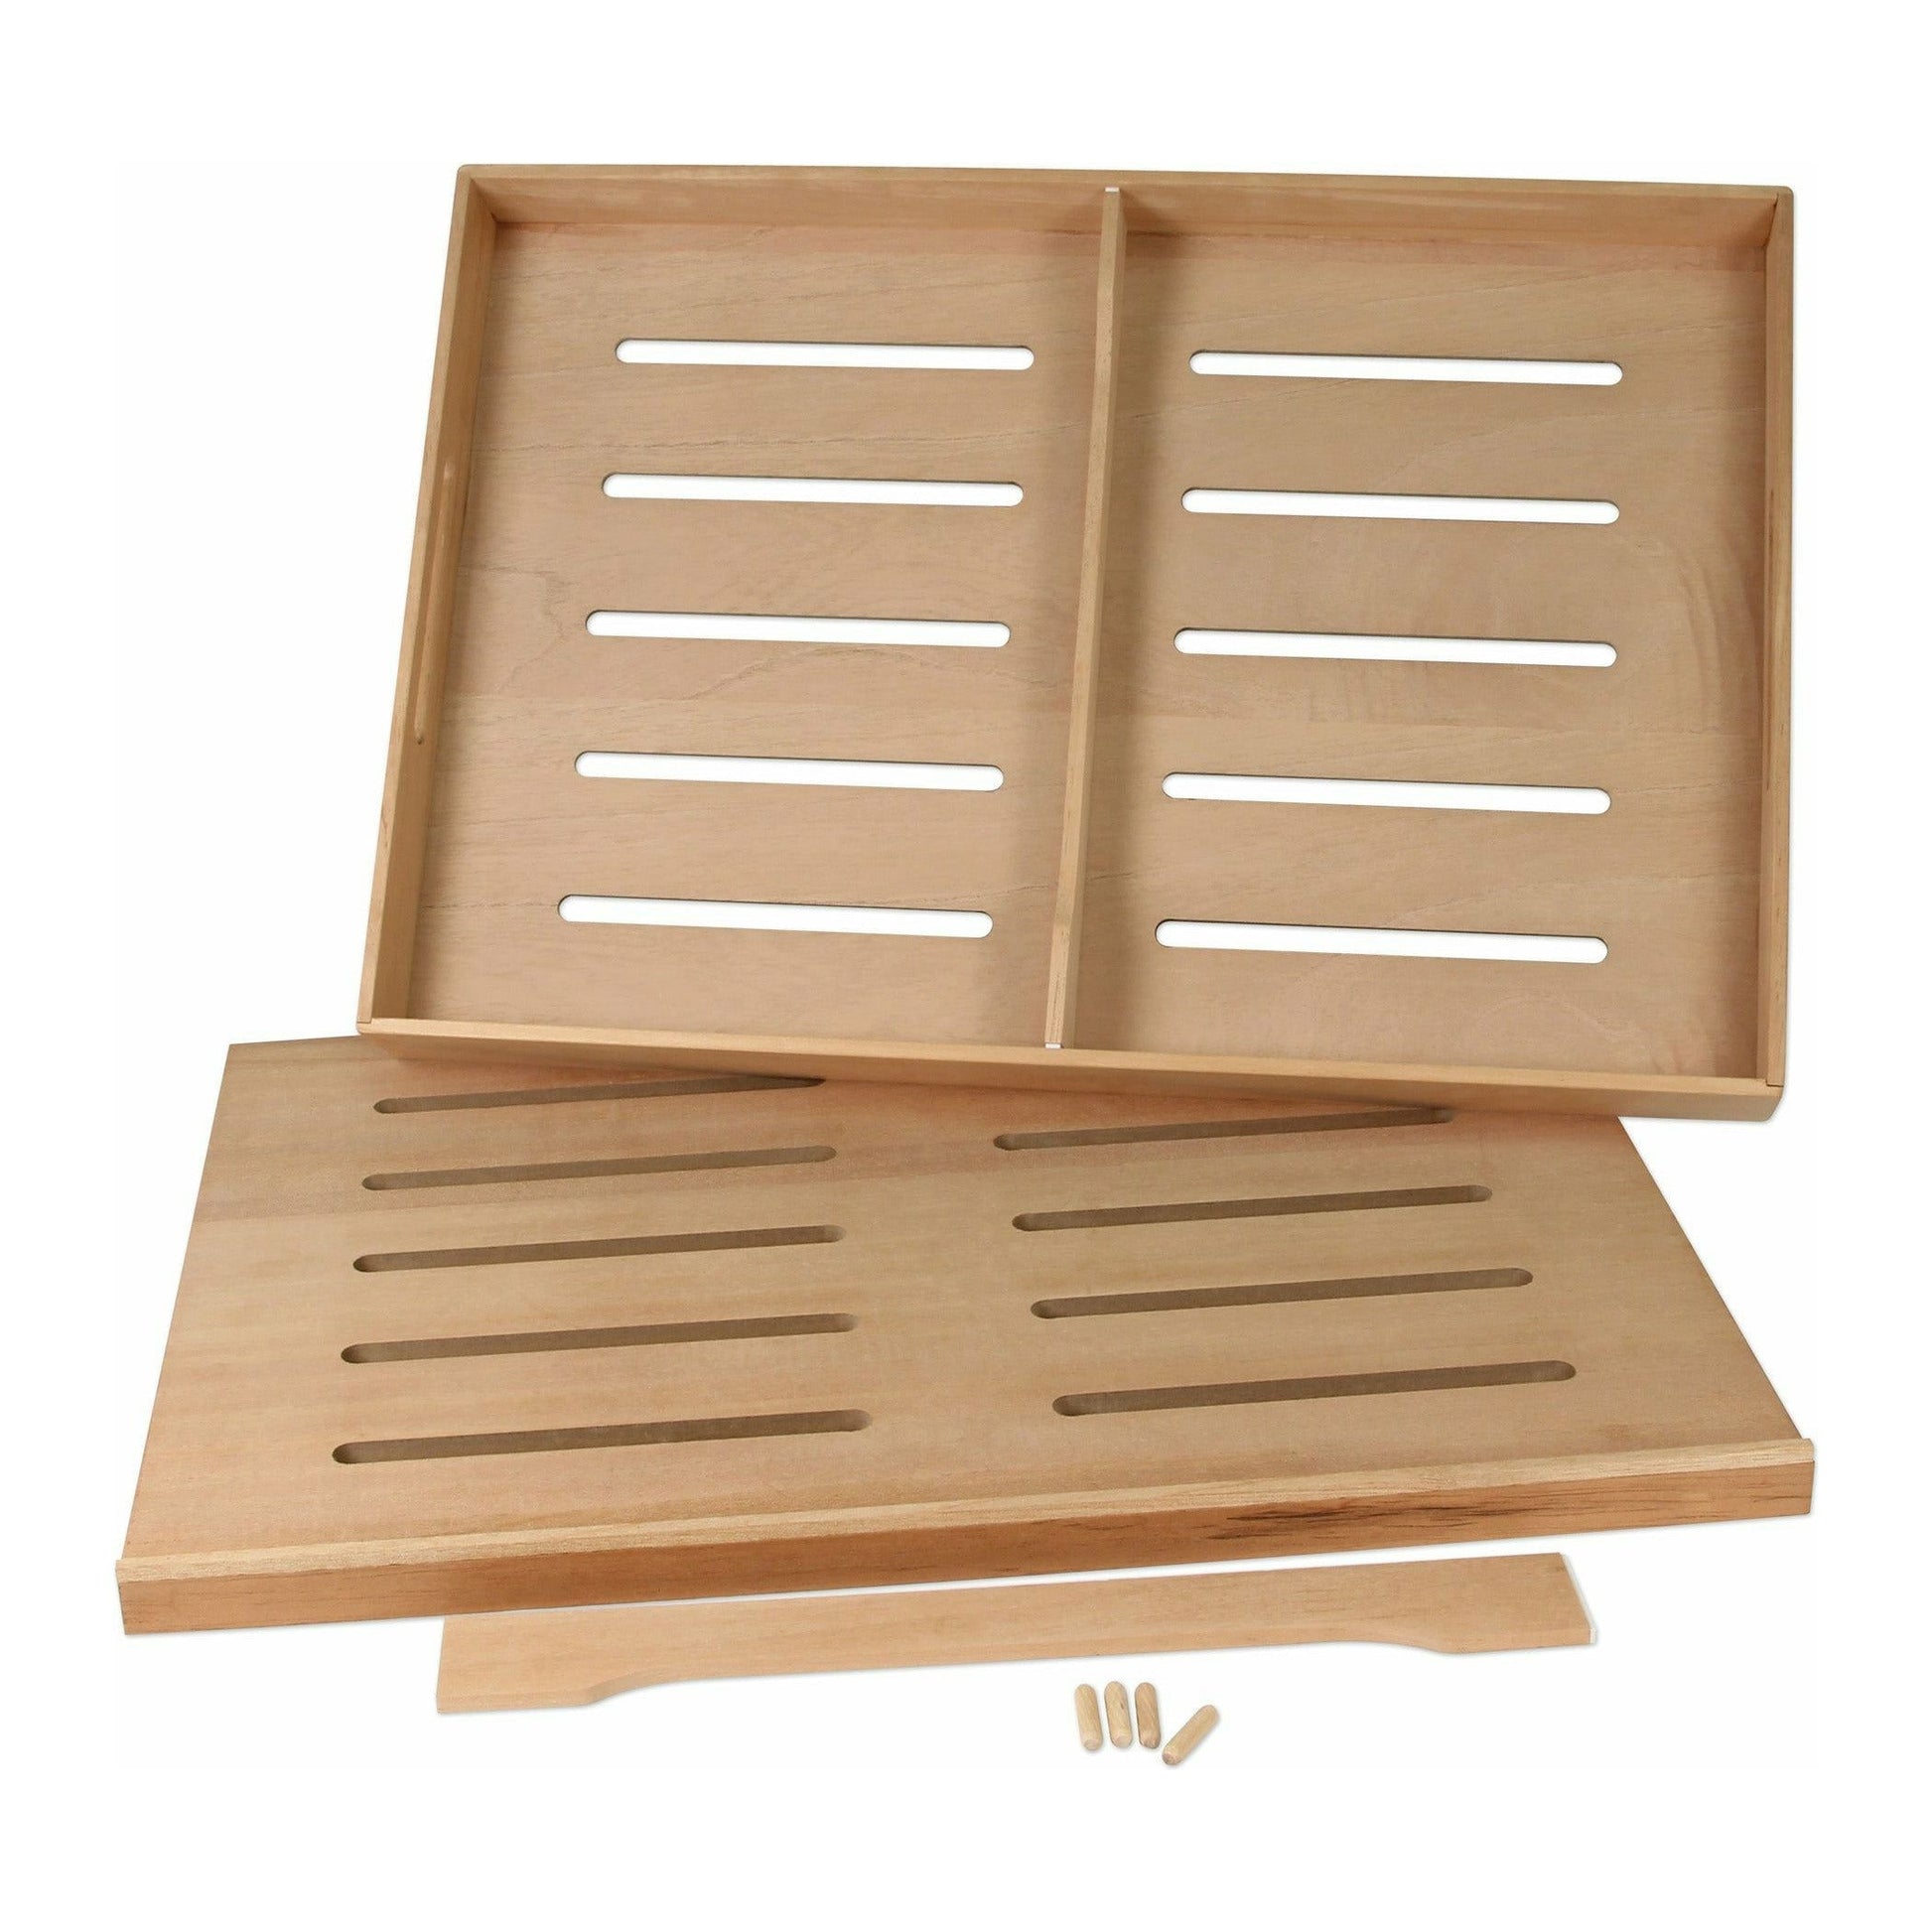 Humidor Supreme Additional Shelf Kit for HUM-2000 Towers 1 Tray 1 Shelf 1 Divider and 4 Pegs Not for Old English or Antique-Humidors-Wine Whiskey and Smoke